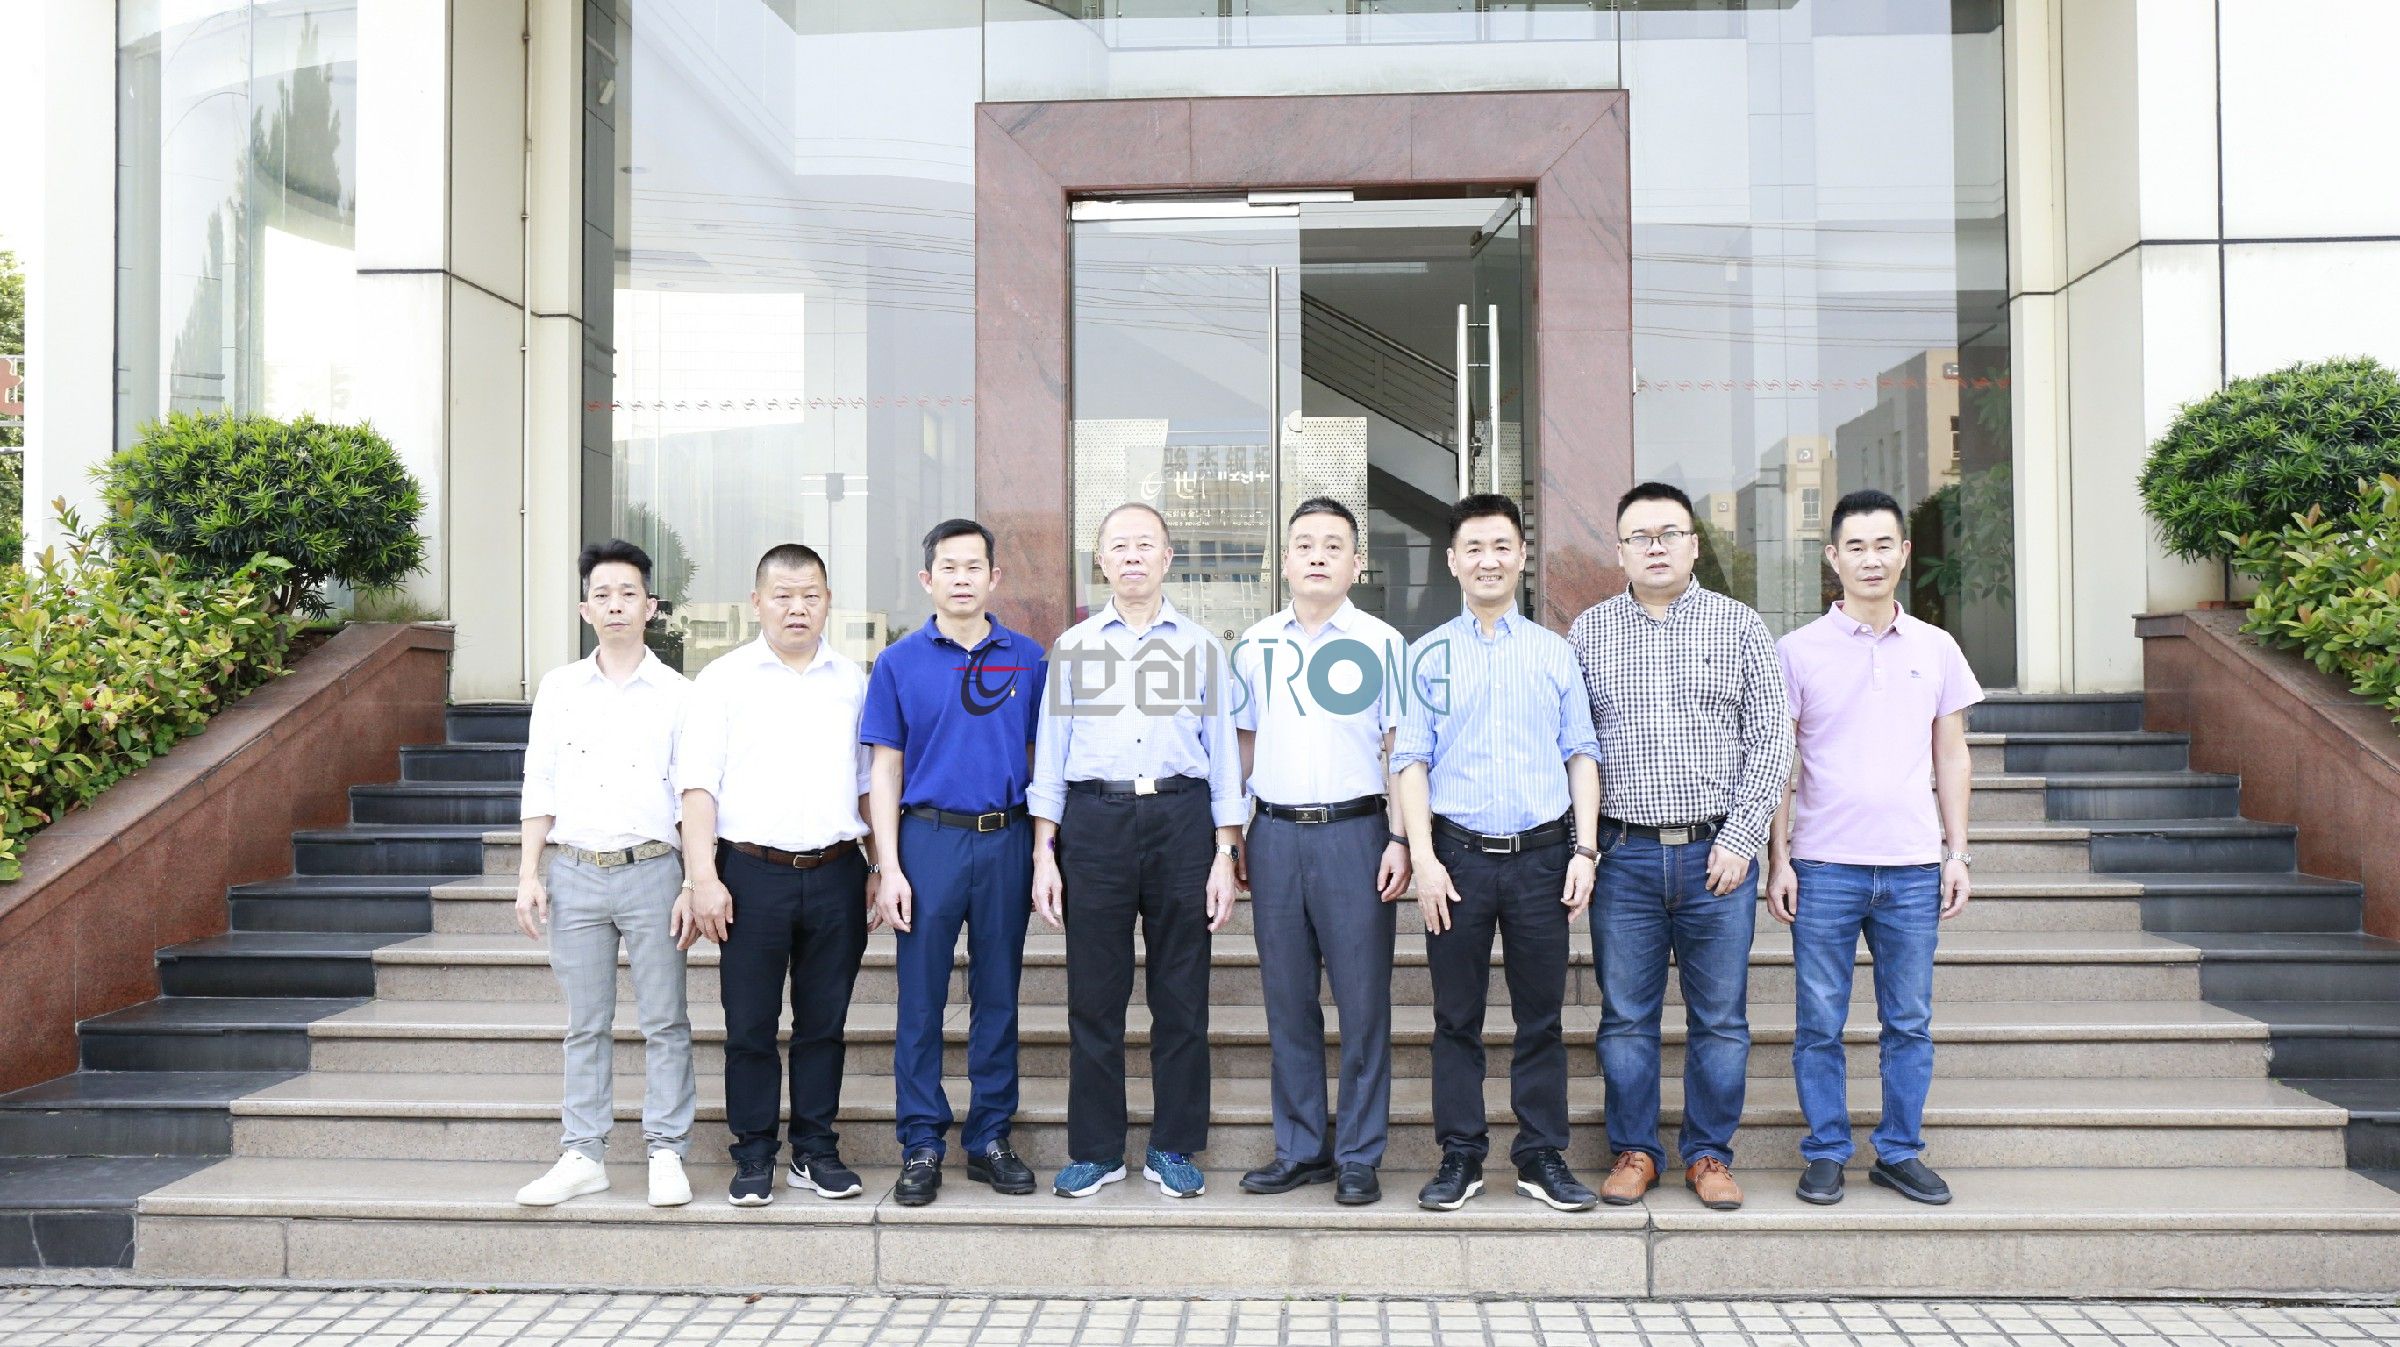 Lv Dongxian, secretary general of China Heat Treatment Industry Association, and his party visited STRONG TECHNOLOGY